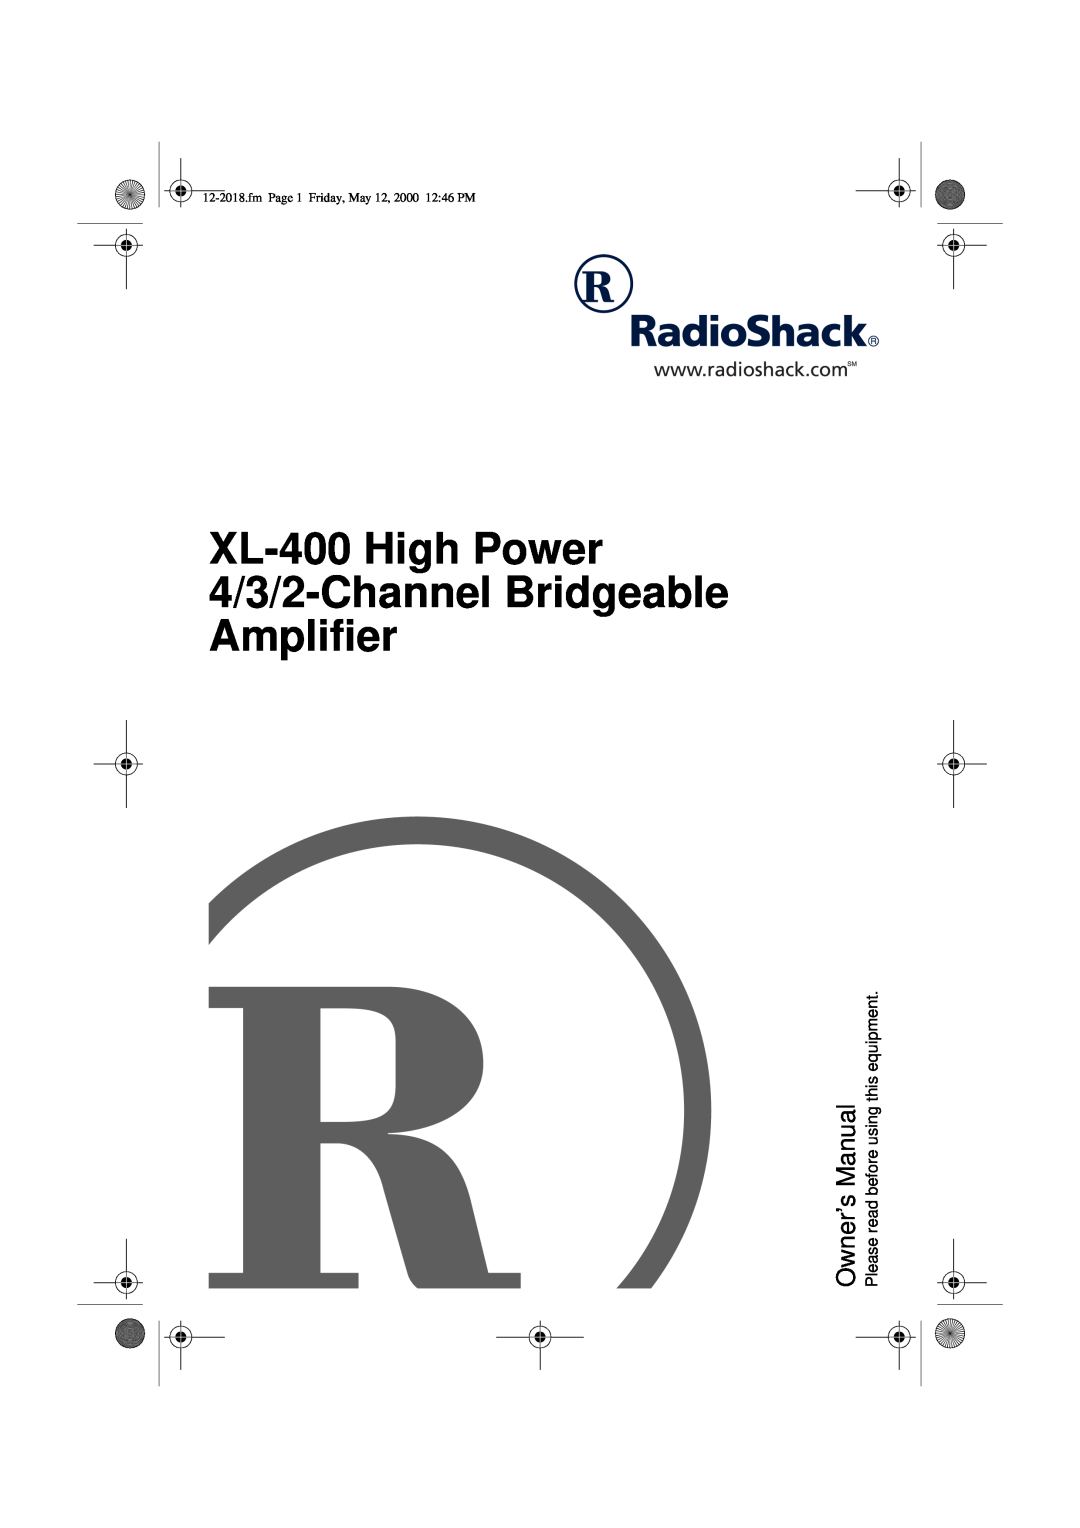 Radio Shack owner manual XL-400High Power 4/3/2-ChannelBridgeable, Amplifier, fmPage 1 Friday, May 12, 2000 12 46 PM 